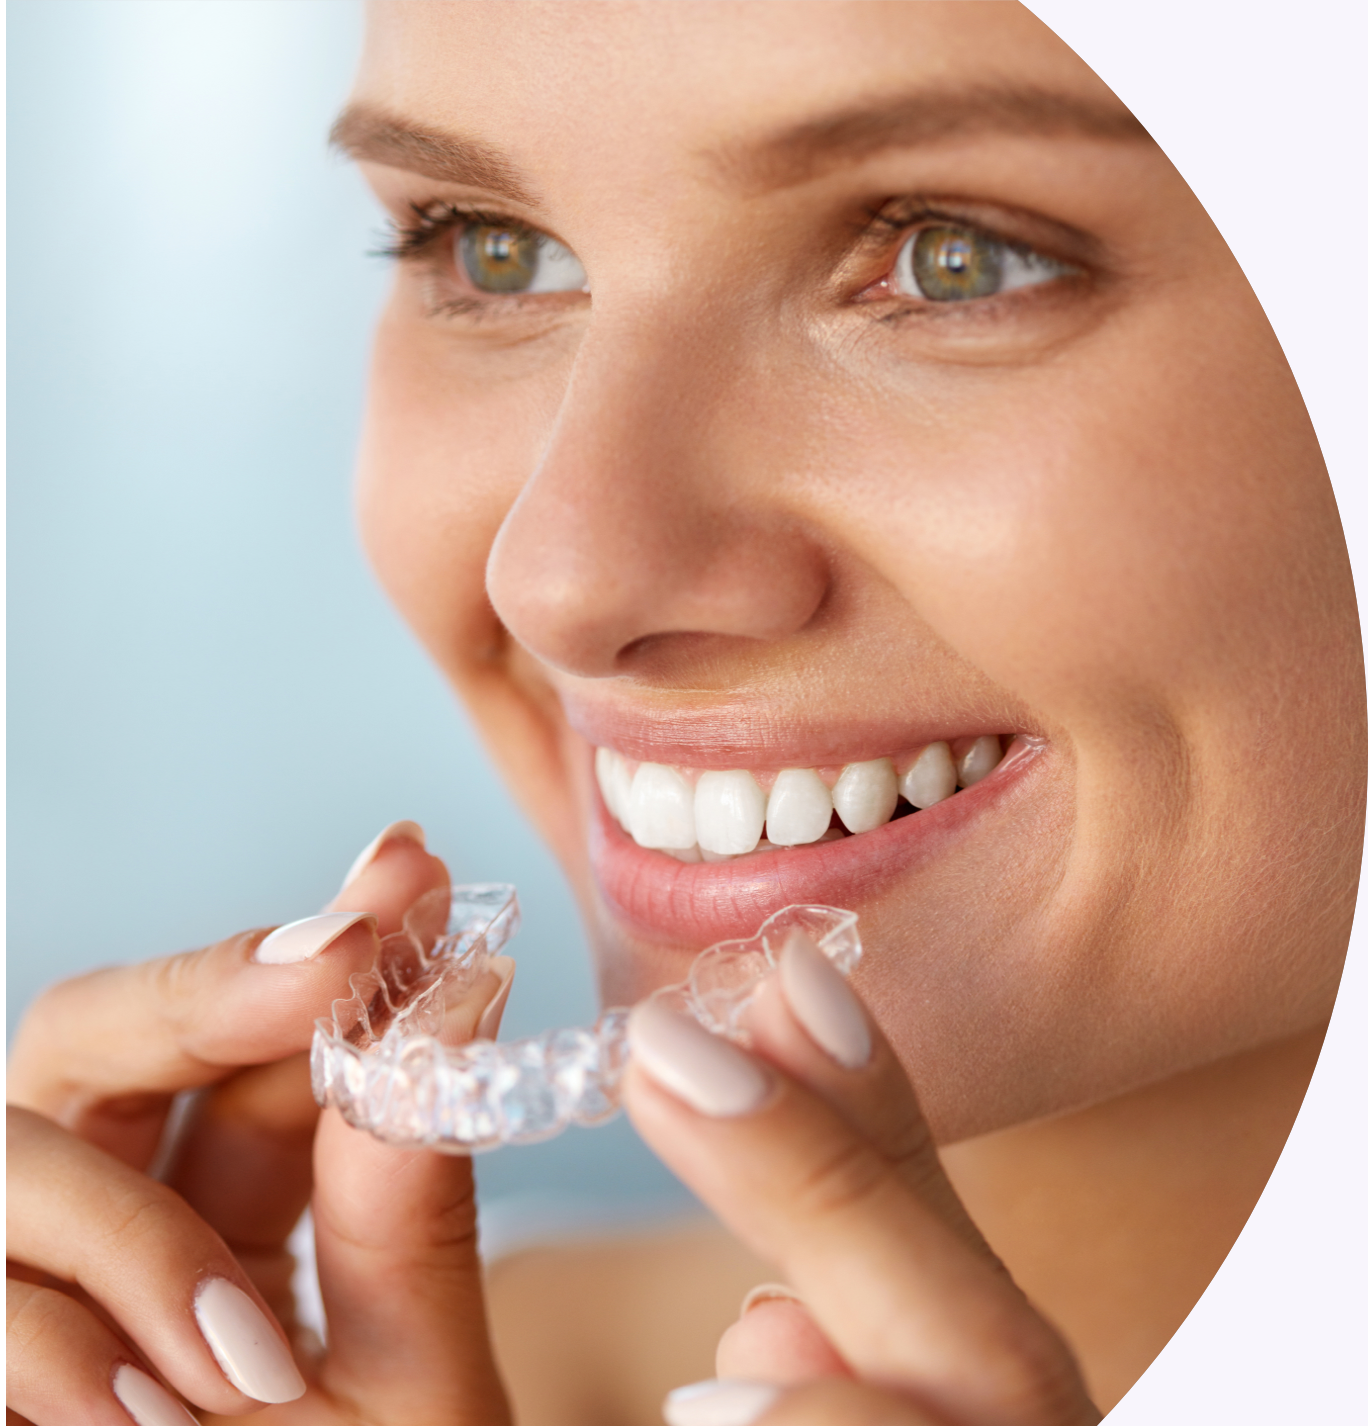 woman putting in Invisalign braces